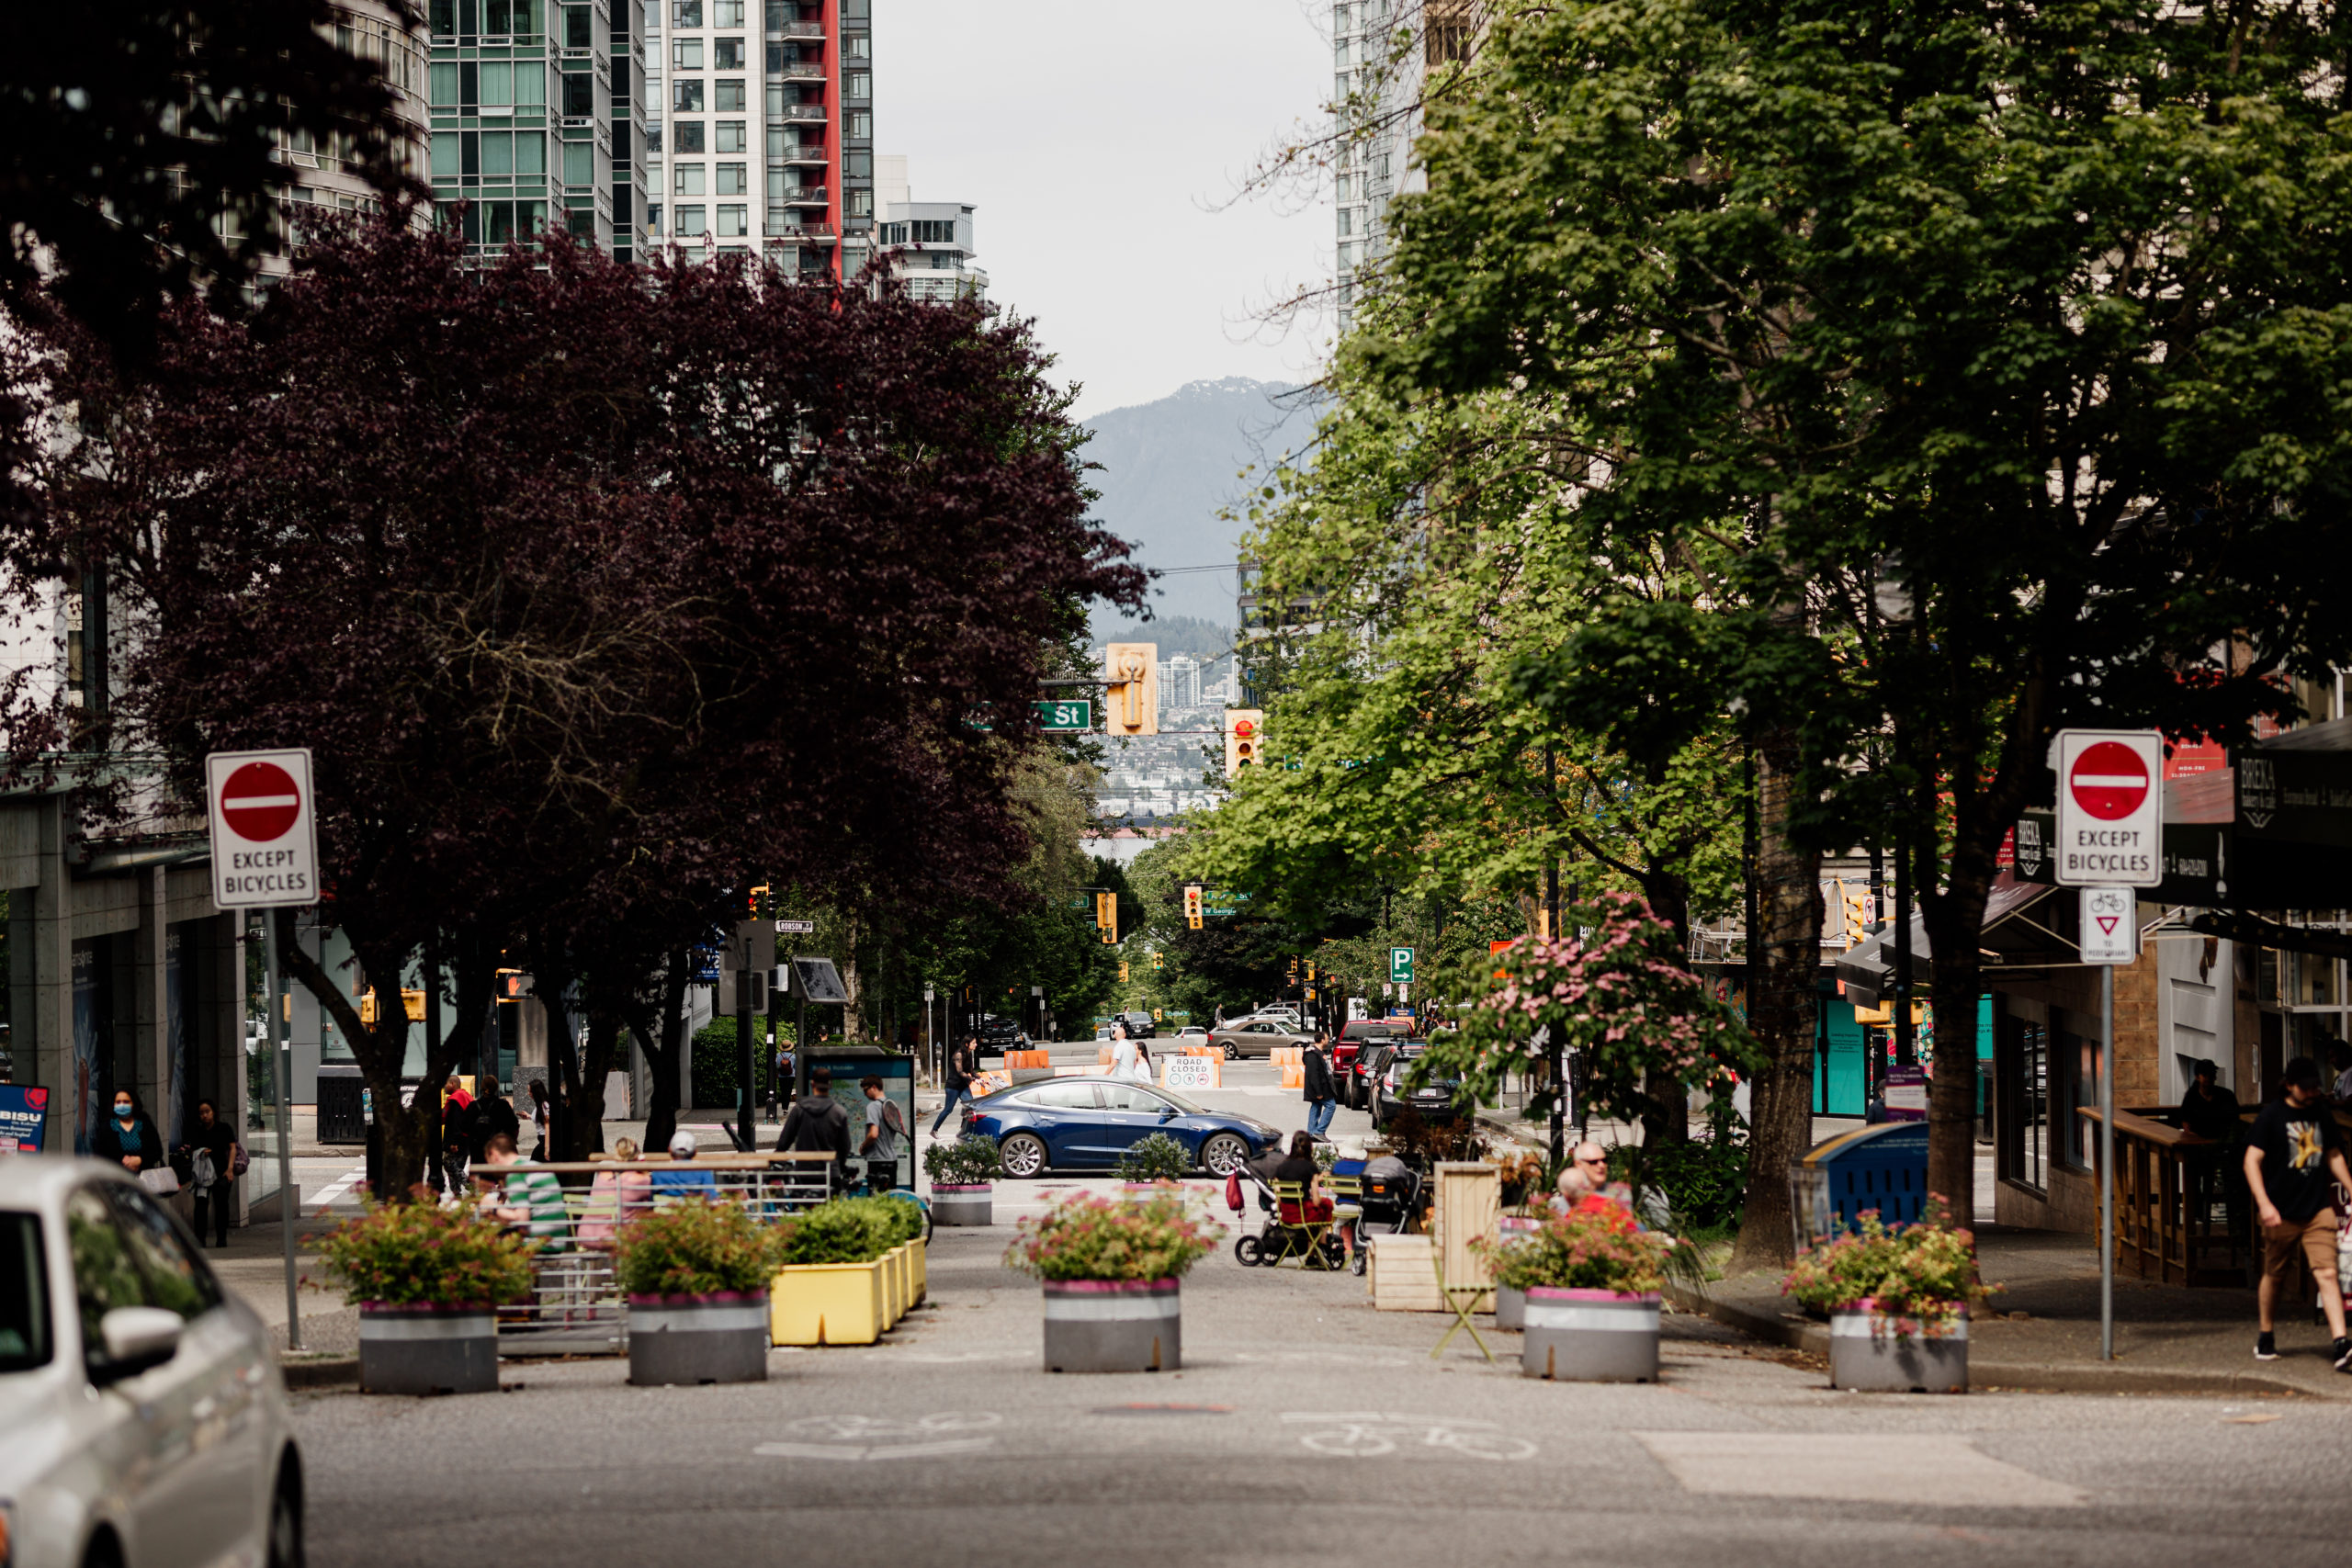 Vancouver Shopping: Parking #onRobson - Robson Street Business Association